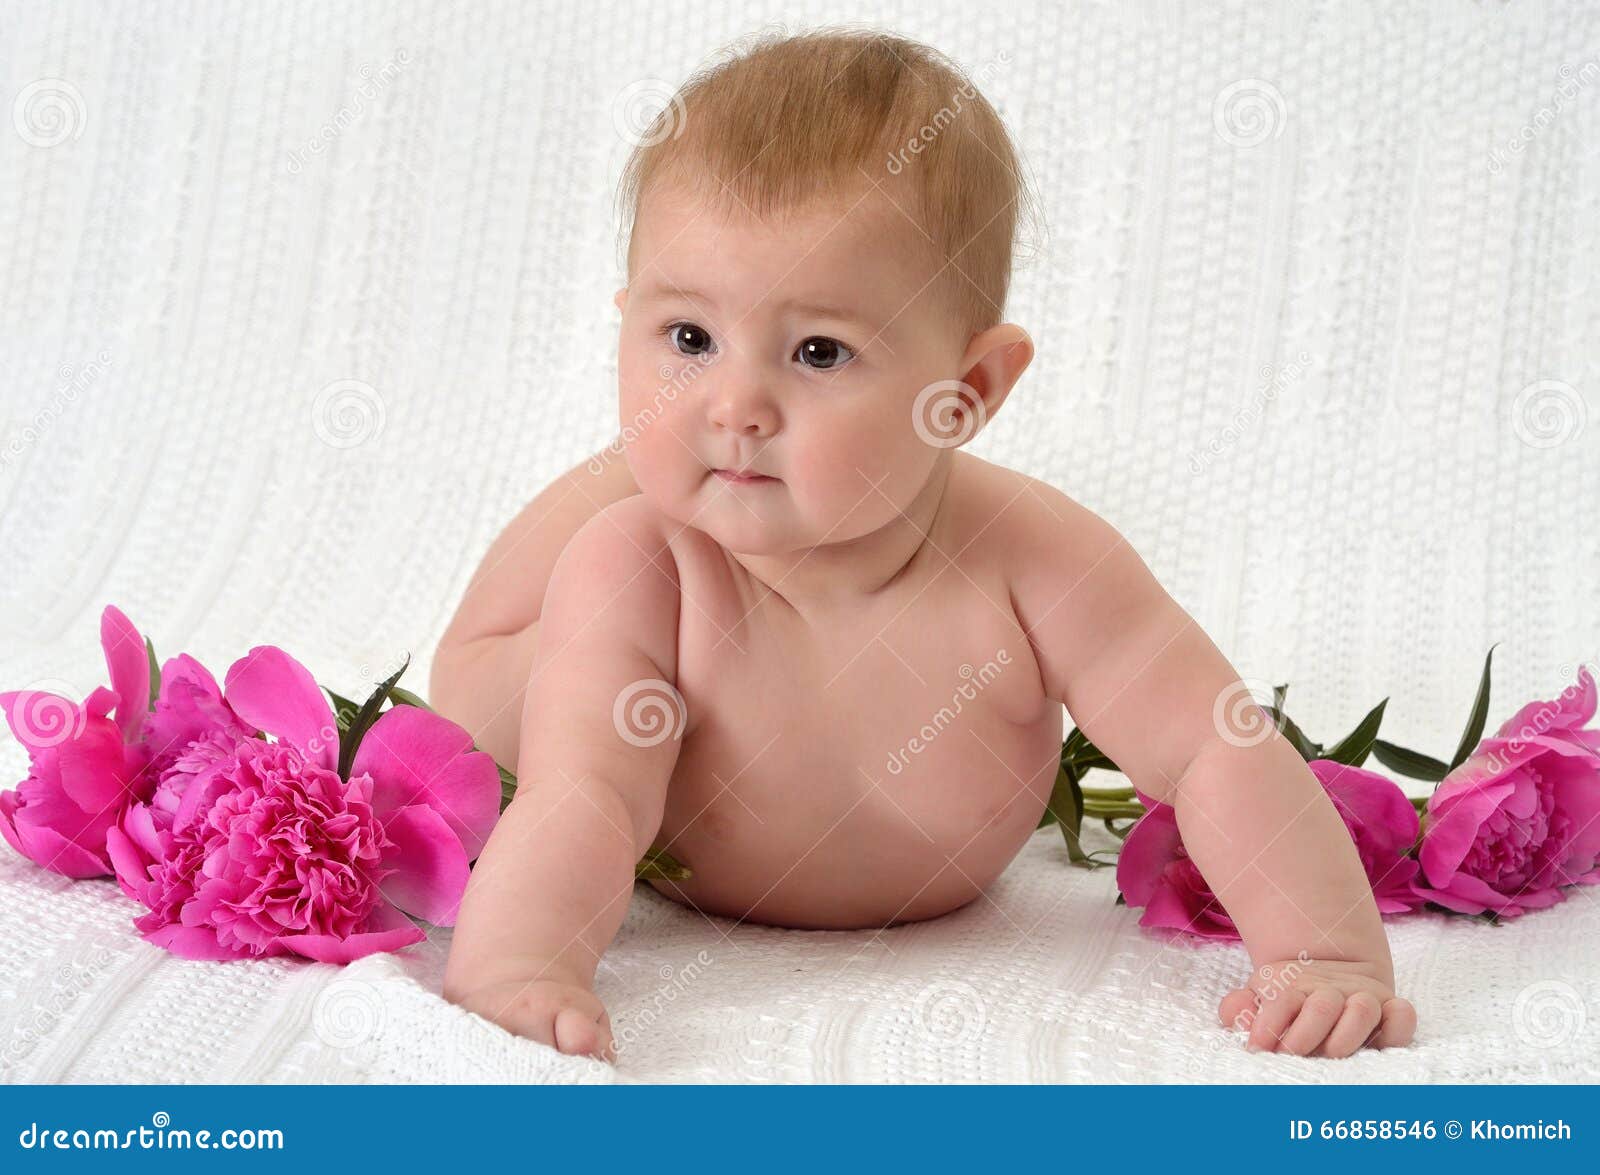 Cute Baby With Flowers Stock Photo Image Of Human Closeup 66858546